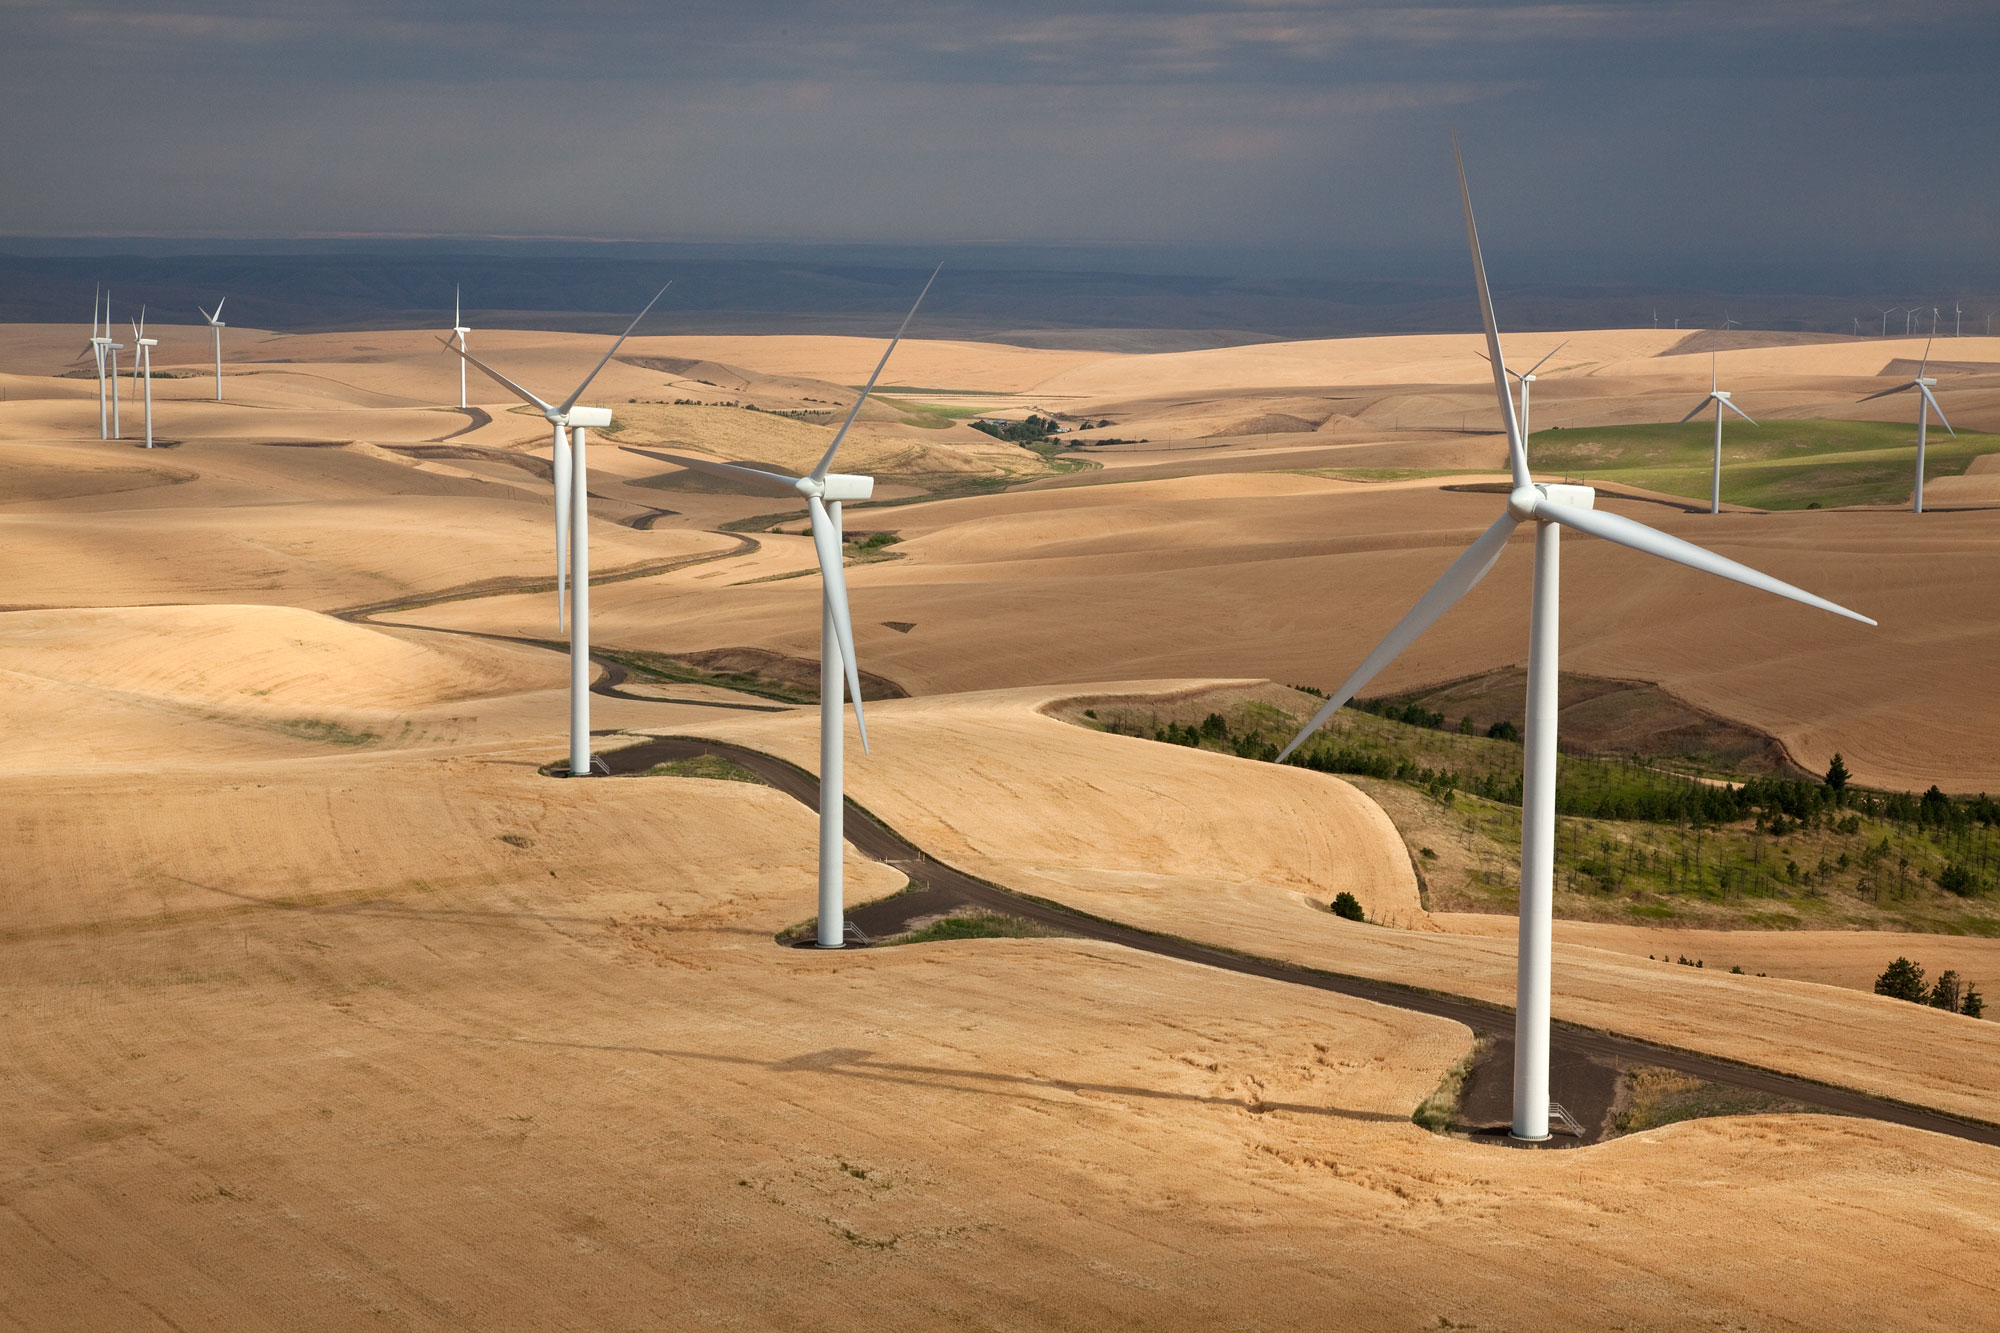 Photograph of wind turbines near Walla Walla, Washington. The photograph shows white wind turbines scattered on a landscape of low-rolling hills covered by yellow vegetation.